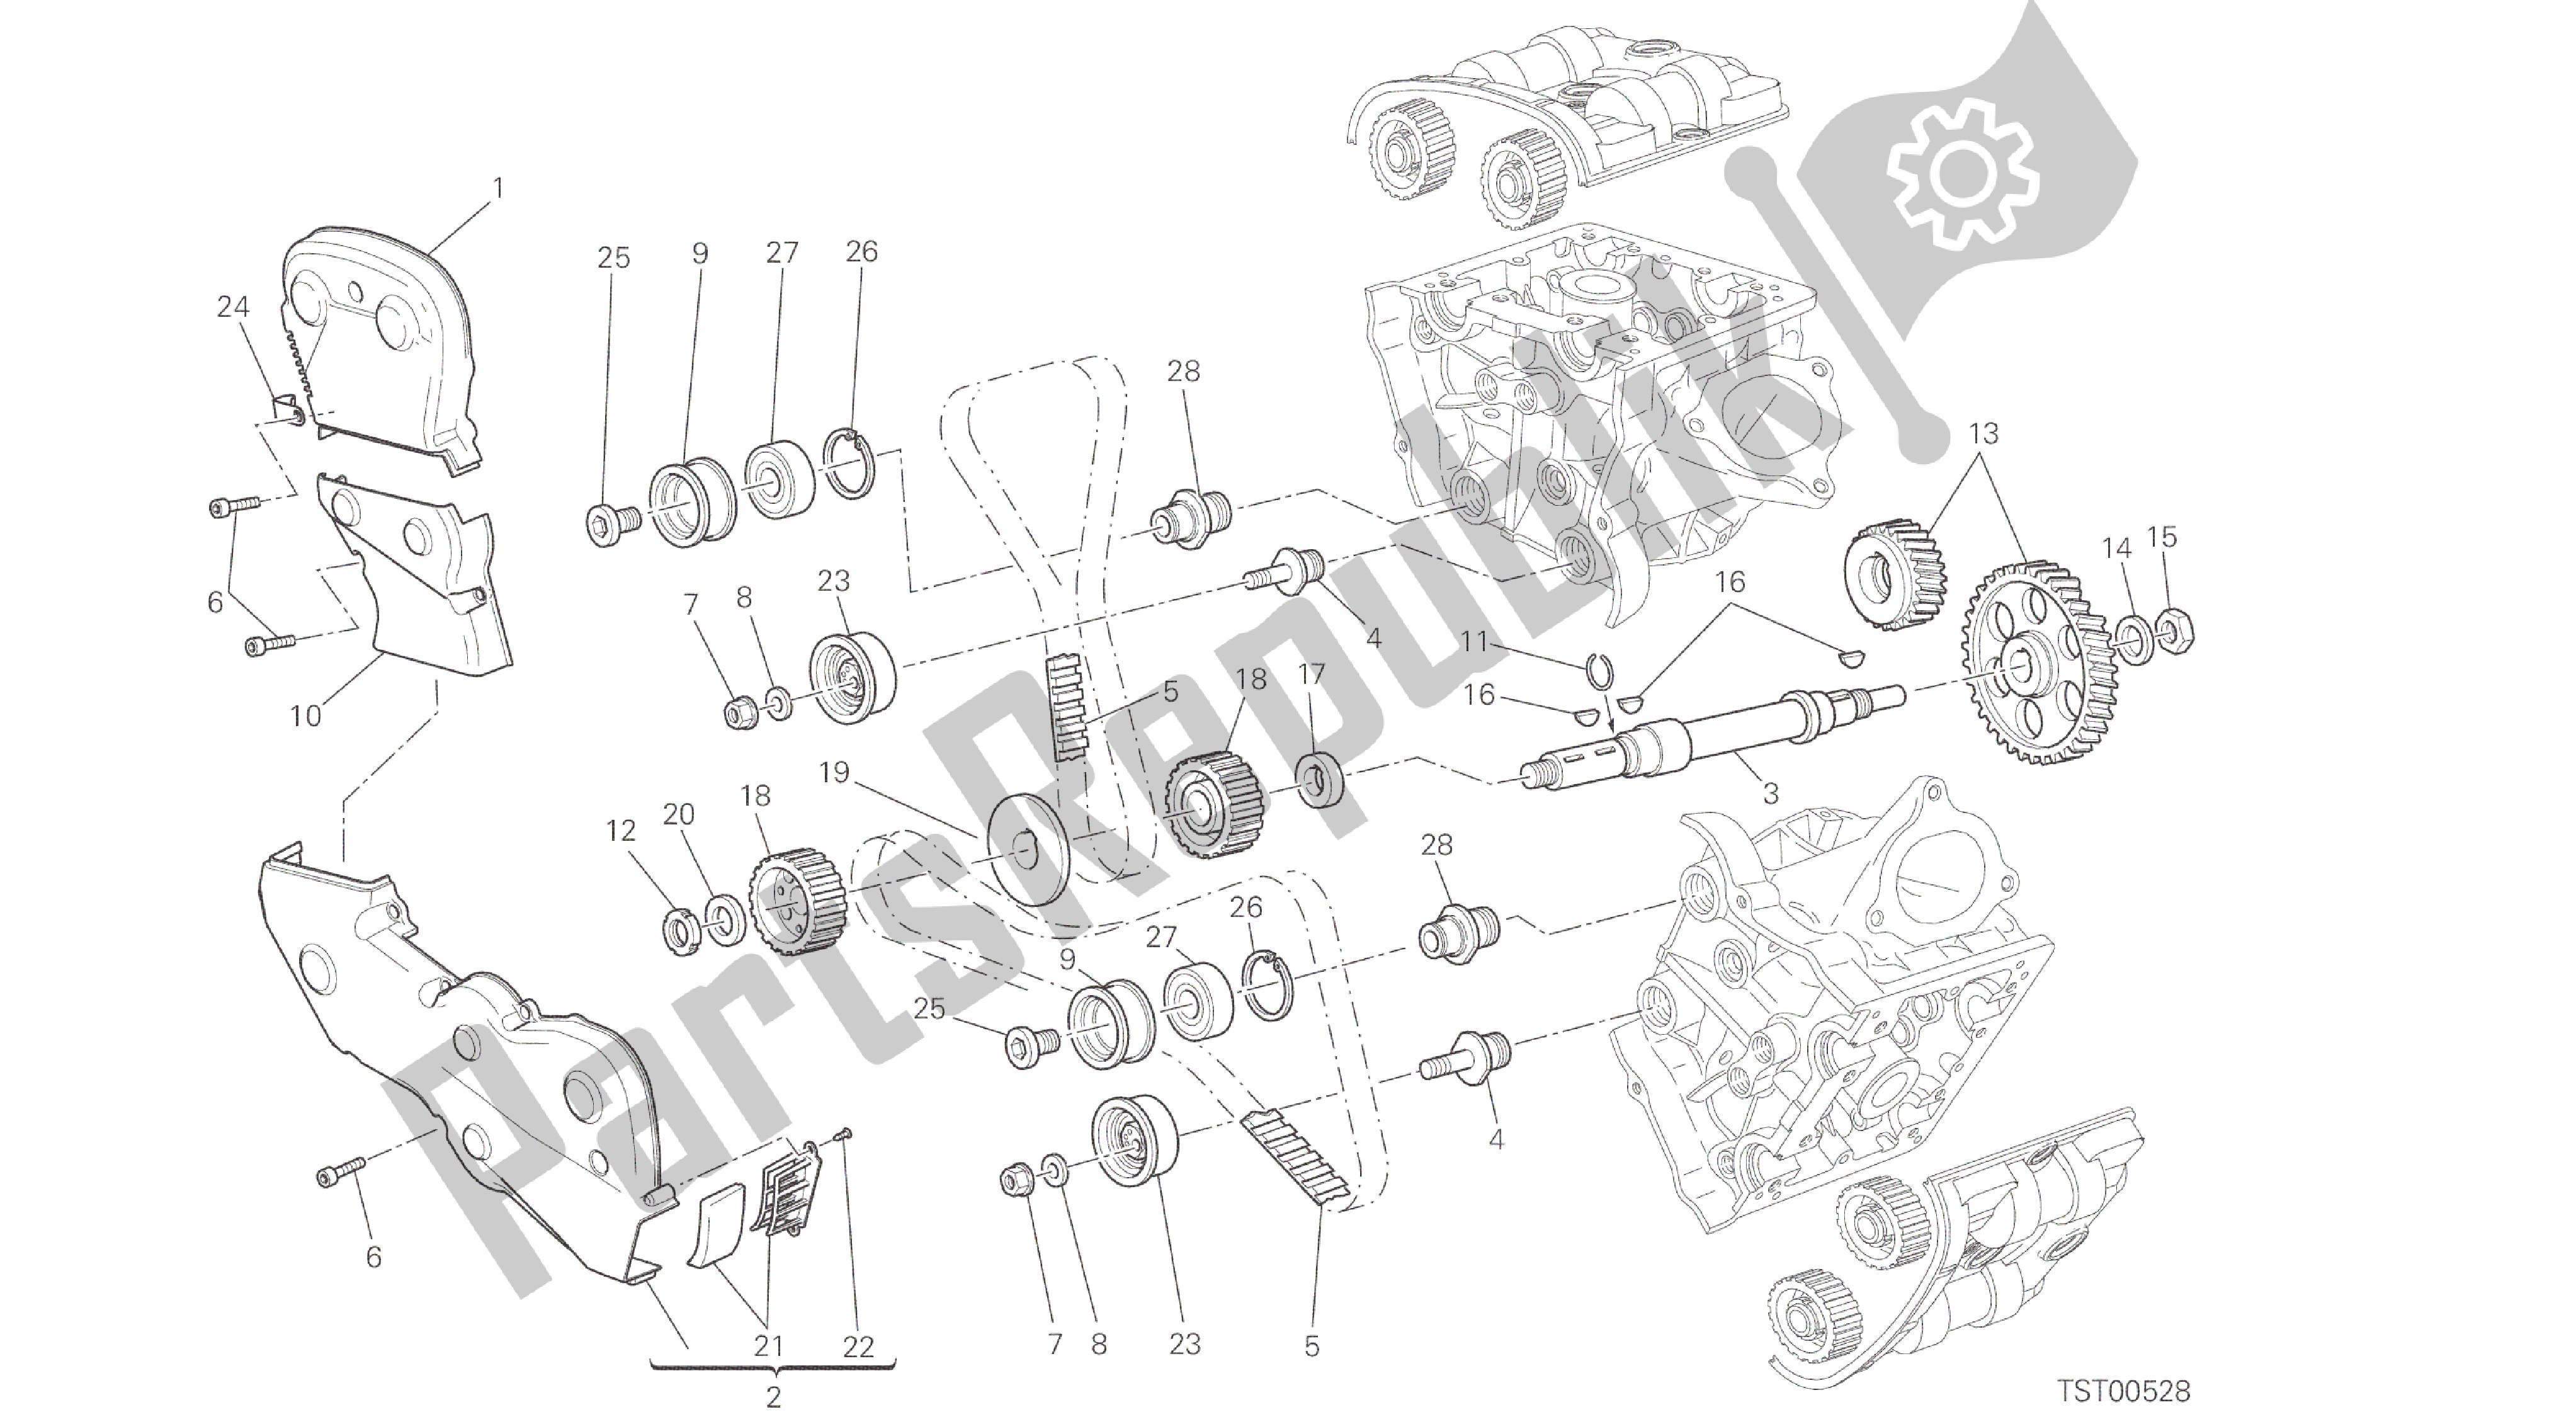 All parts for the Drawing 008 - Distribuzione [mod:hym;xst:aus,eur,fra,jap,twn]group Engine of the Ducati Hypermotard 821 2015